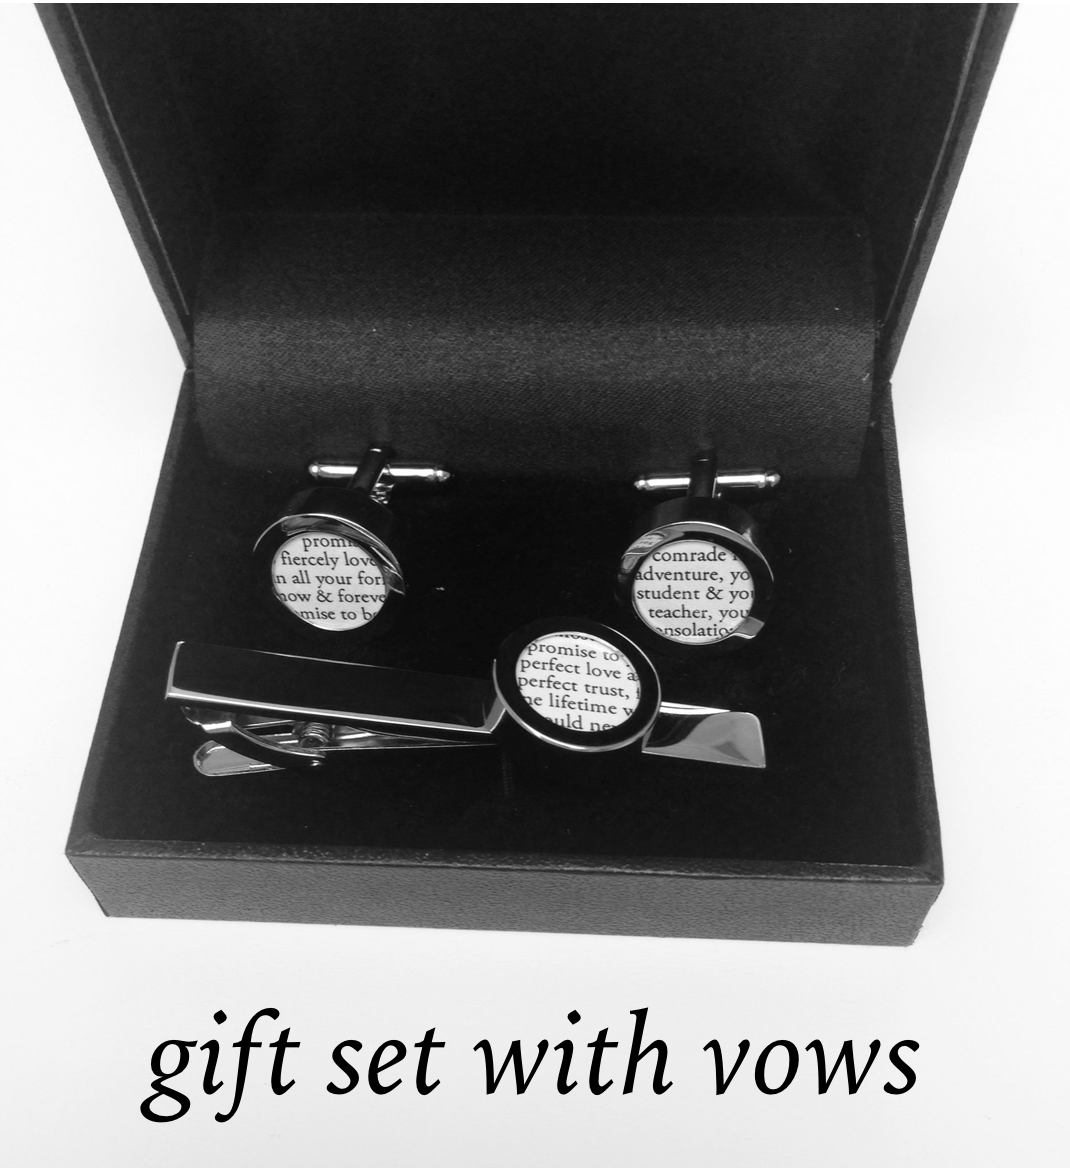 First Anniversary gift idea for him with vows 